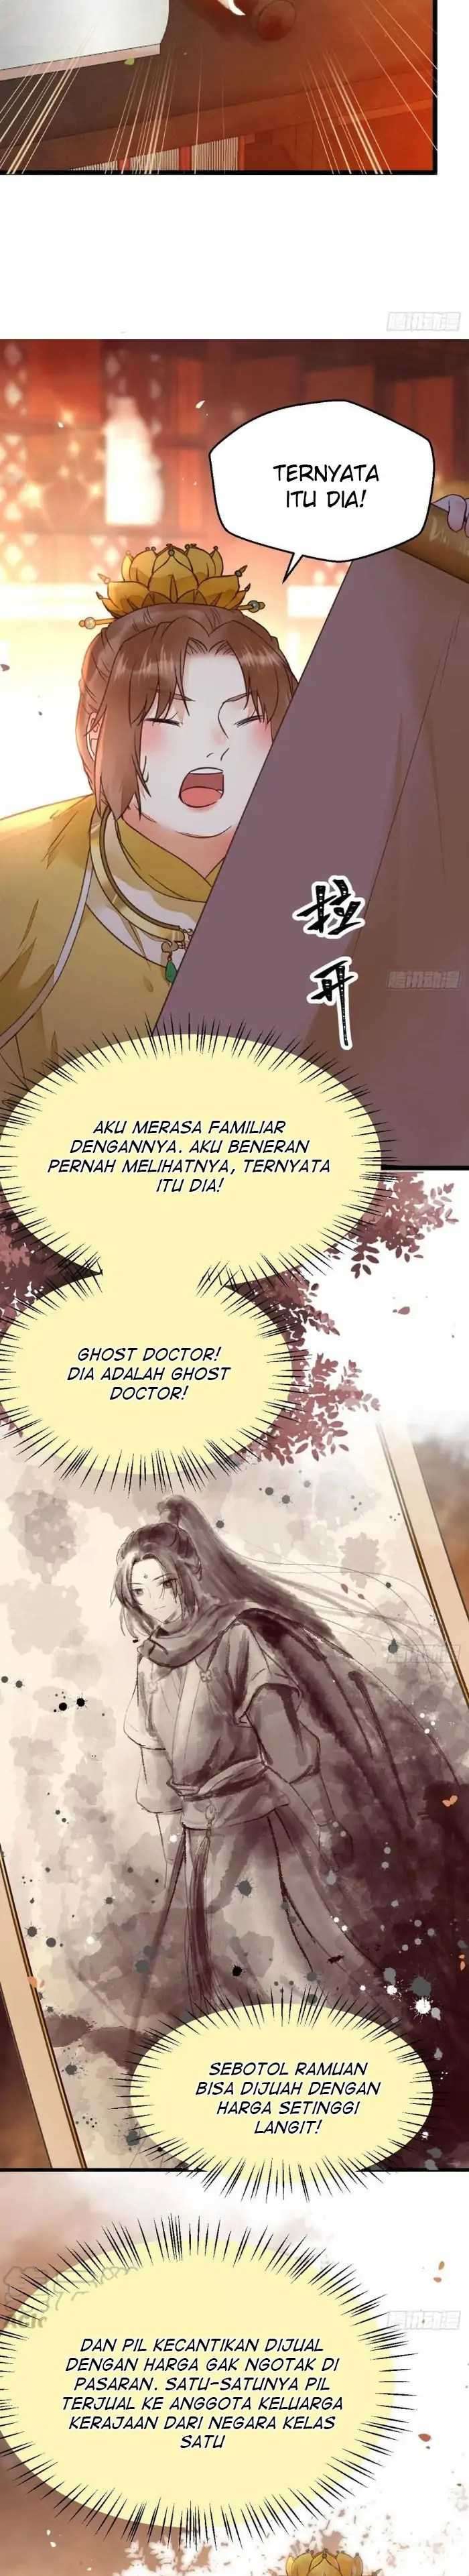 The Ghostly Doctor Chapter 352